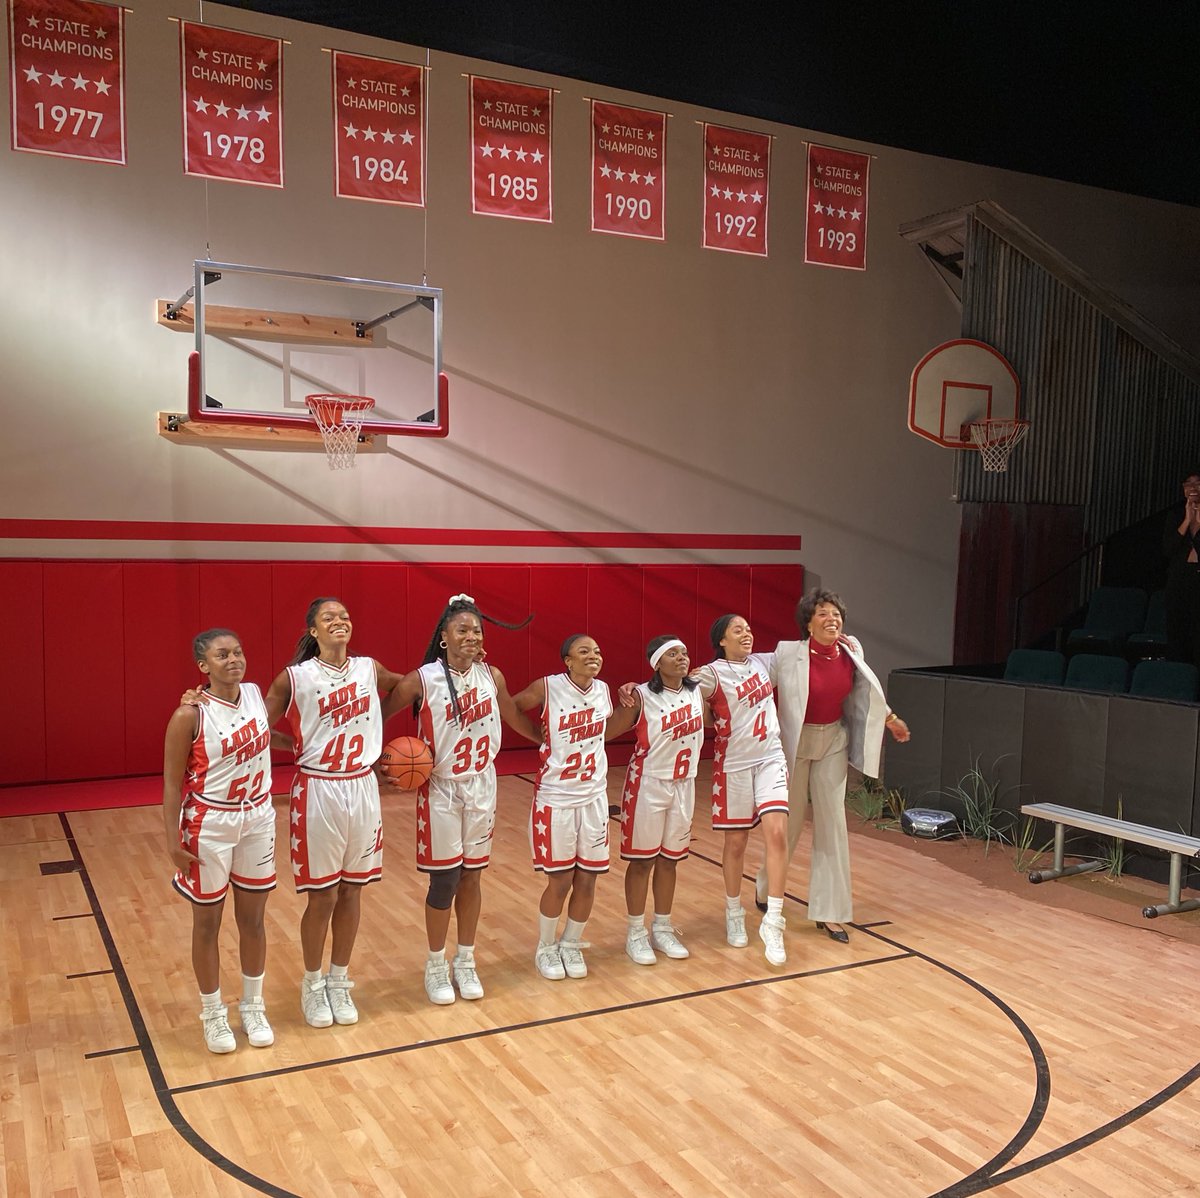 If you’re in or near NYC and you’re a fan of women’s hoops, you NEED to see Flex at Lincoln Center.

It’s a play about a Black women’s HS 🏀 team in Arkansas in 1998. It was SO GOOD! 

Plays like this rarely get produced so go support the arts, Black actors, and women’s hoops!